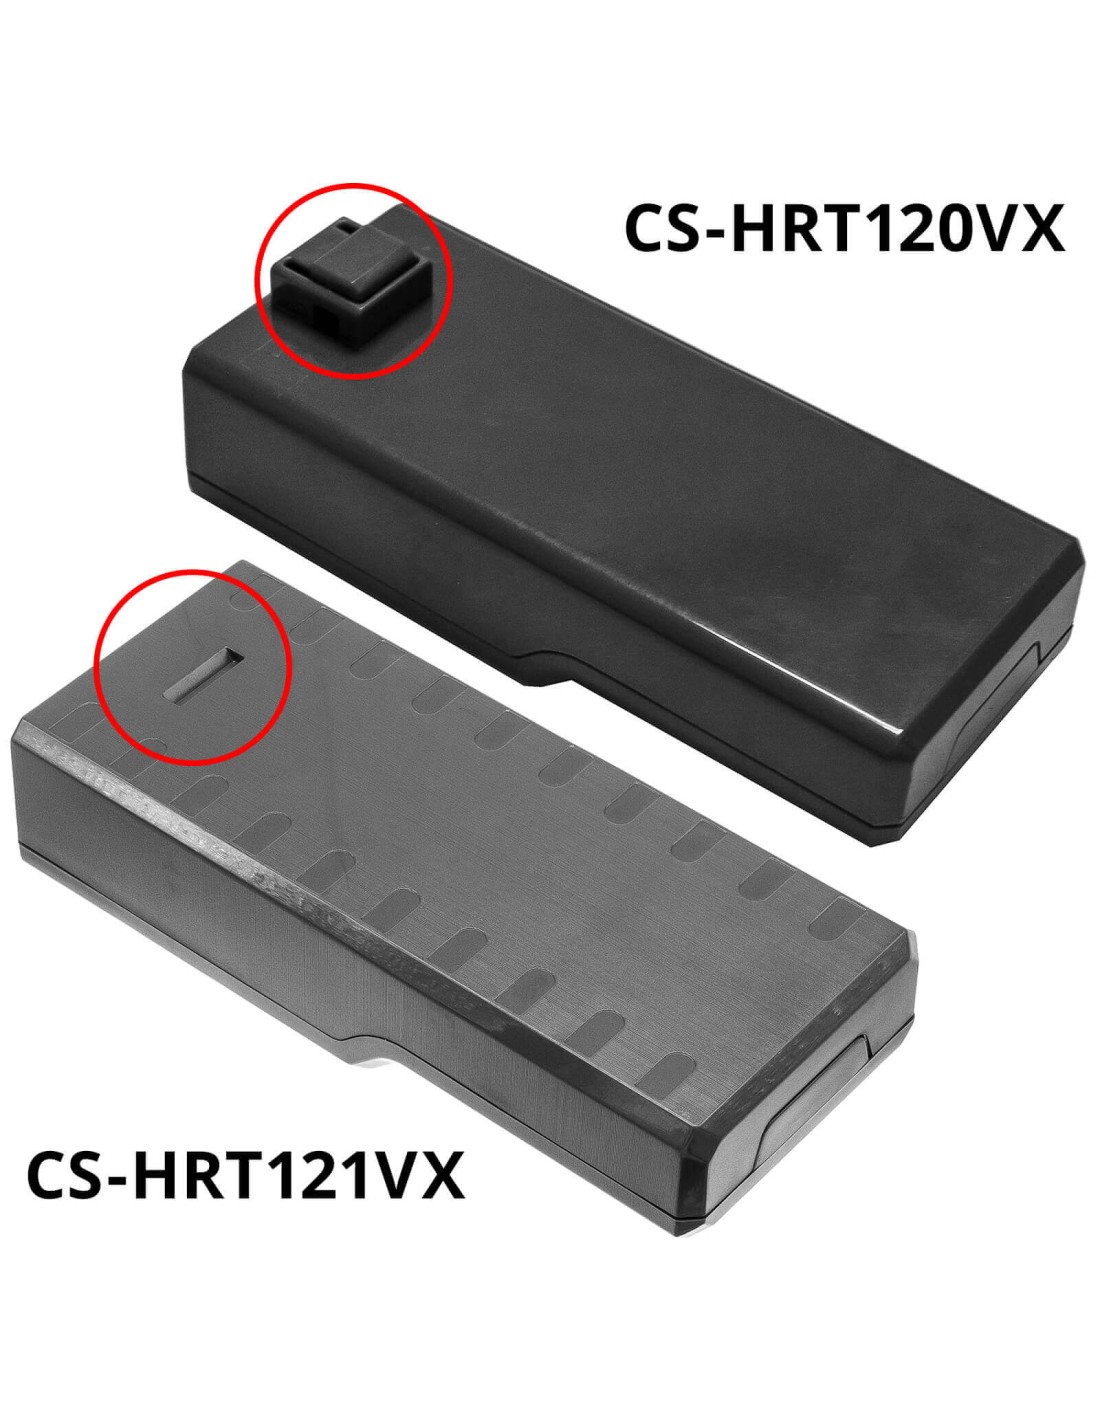 Battery for Hoover, FD22 Freedom, FD22BC 011, 21.6V, 2000mAh - 43.20Wh